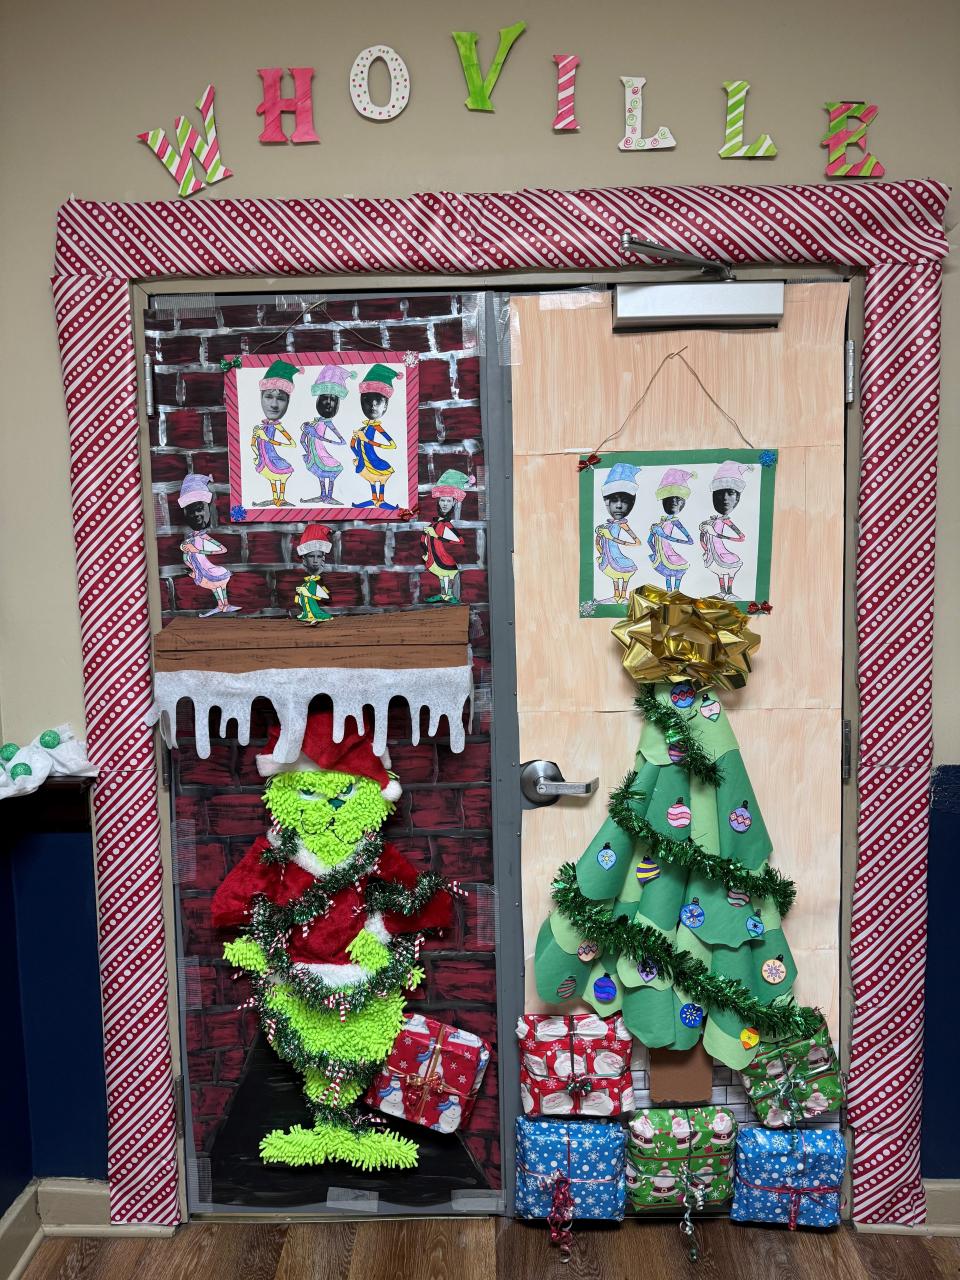 Opposite to the girls' Santa, the boys are stealing back Christmas with their fun Grinch door.